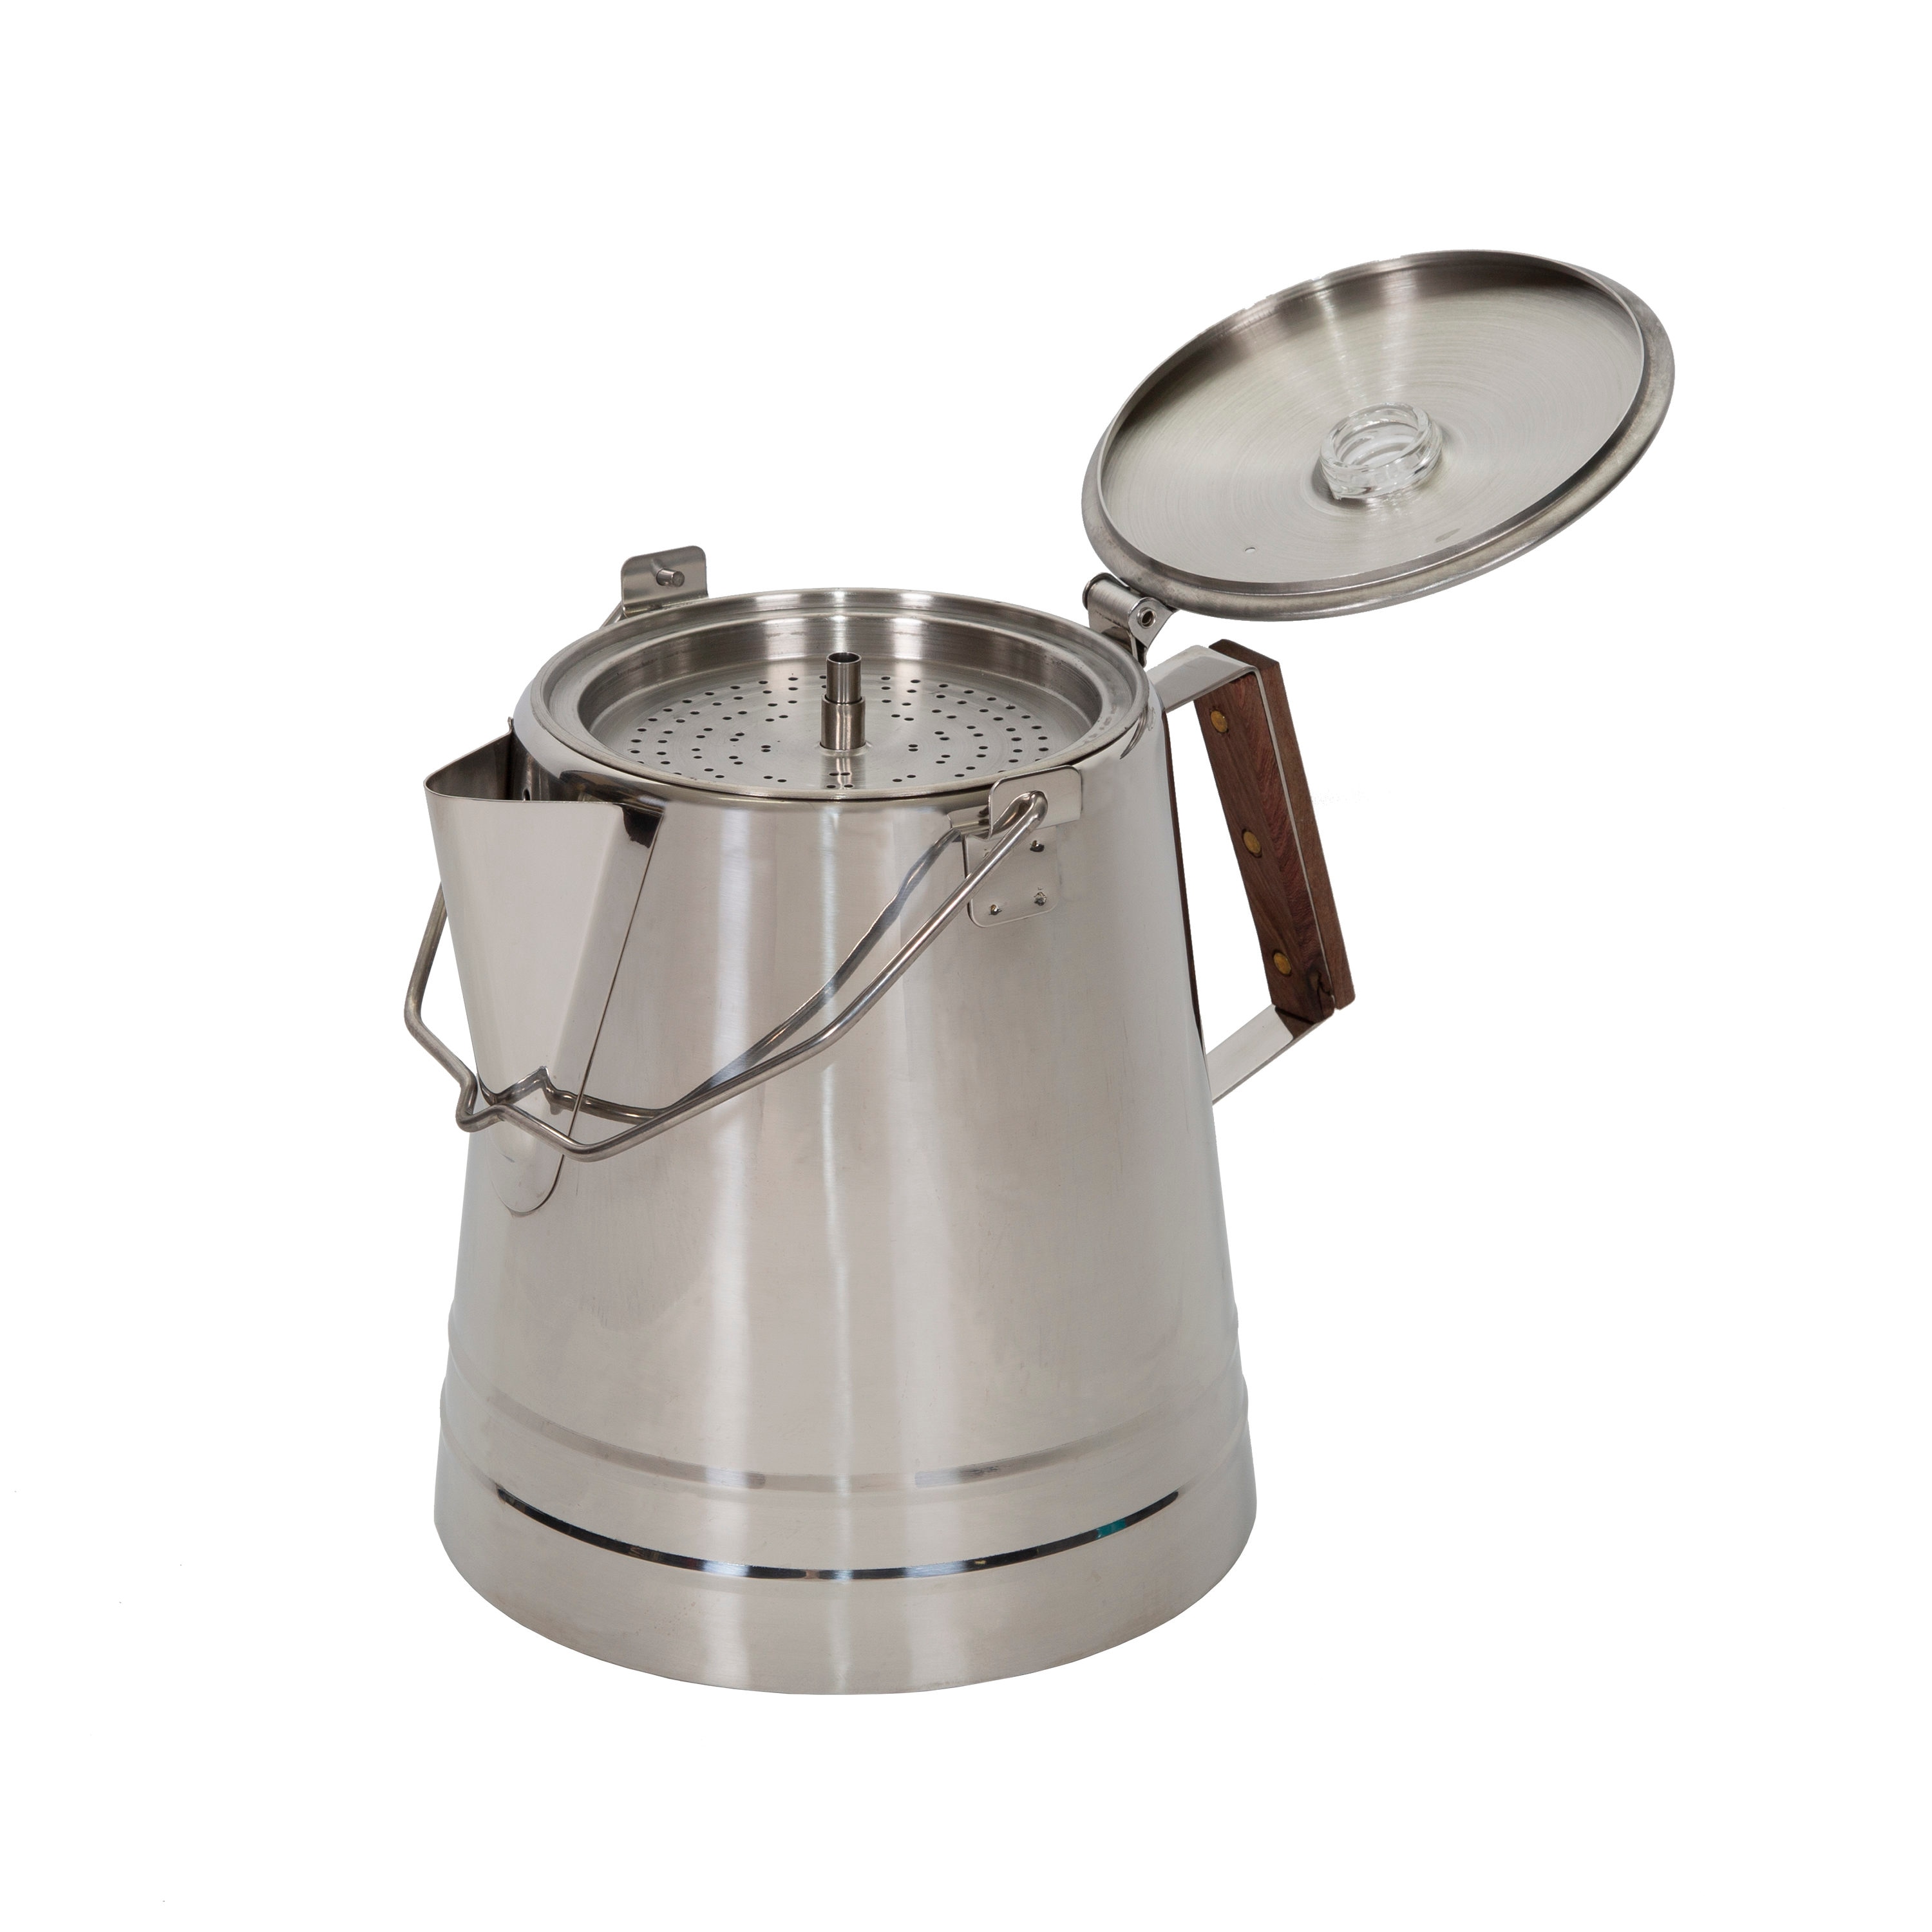 Stansport 28-Cup Stainless Steel Percolator Coffee Pot